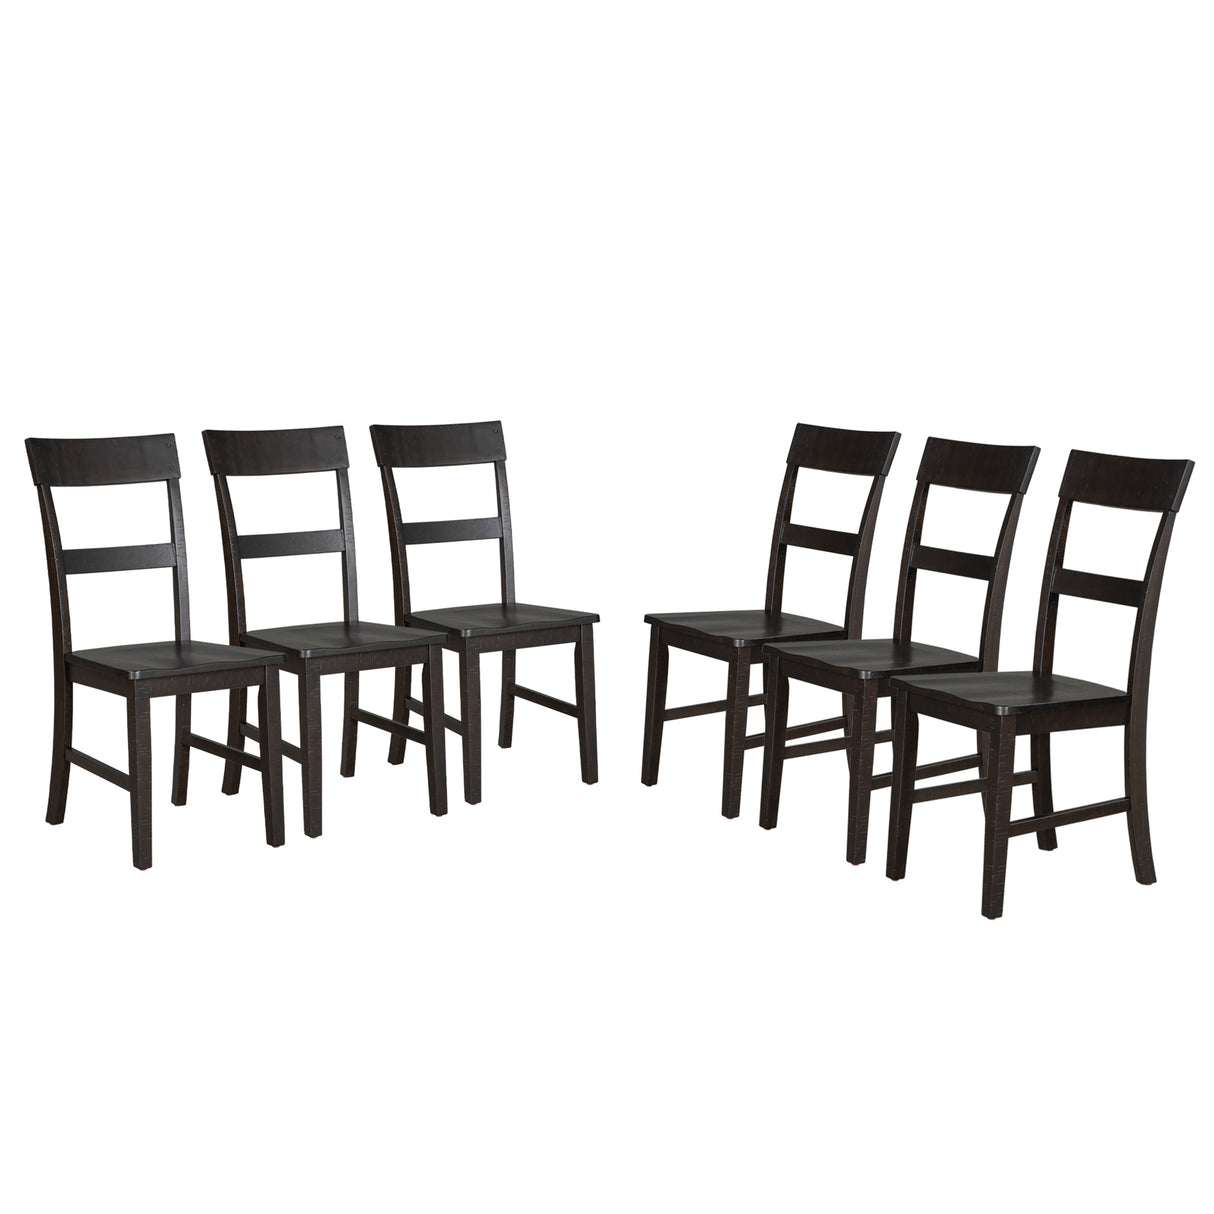 TREXM Industrial Style Wood Dining Chairs with Ergonomic Design, Set of 6 (Espresso) - Home Elegance USA